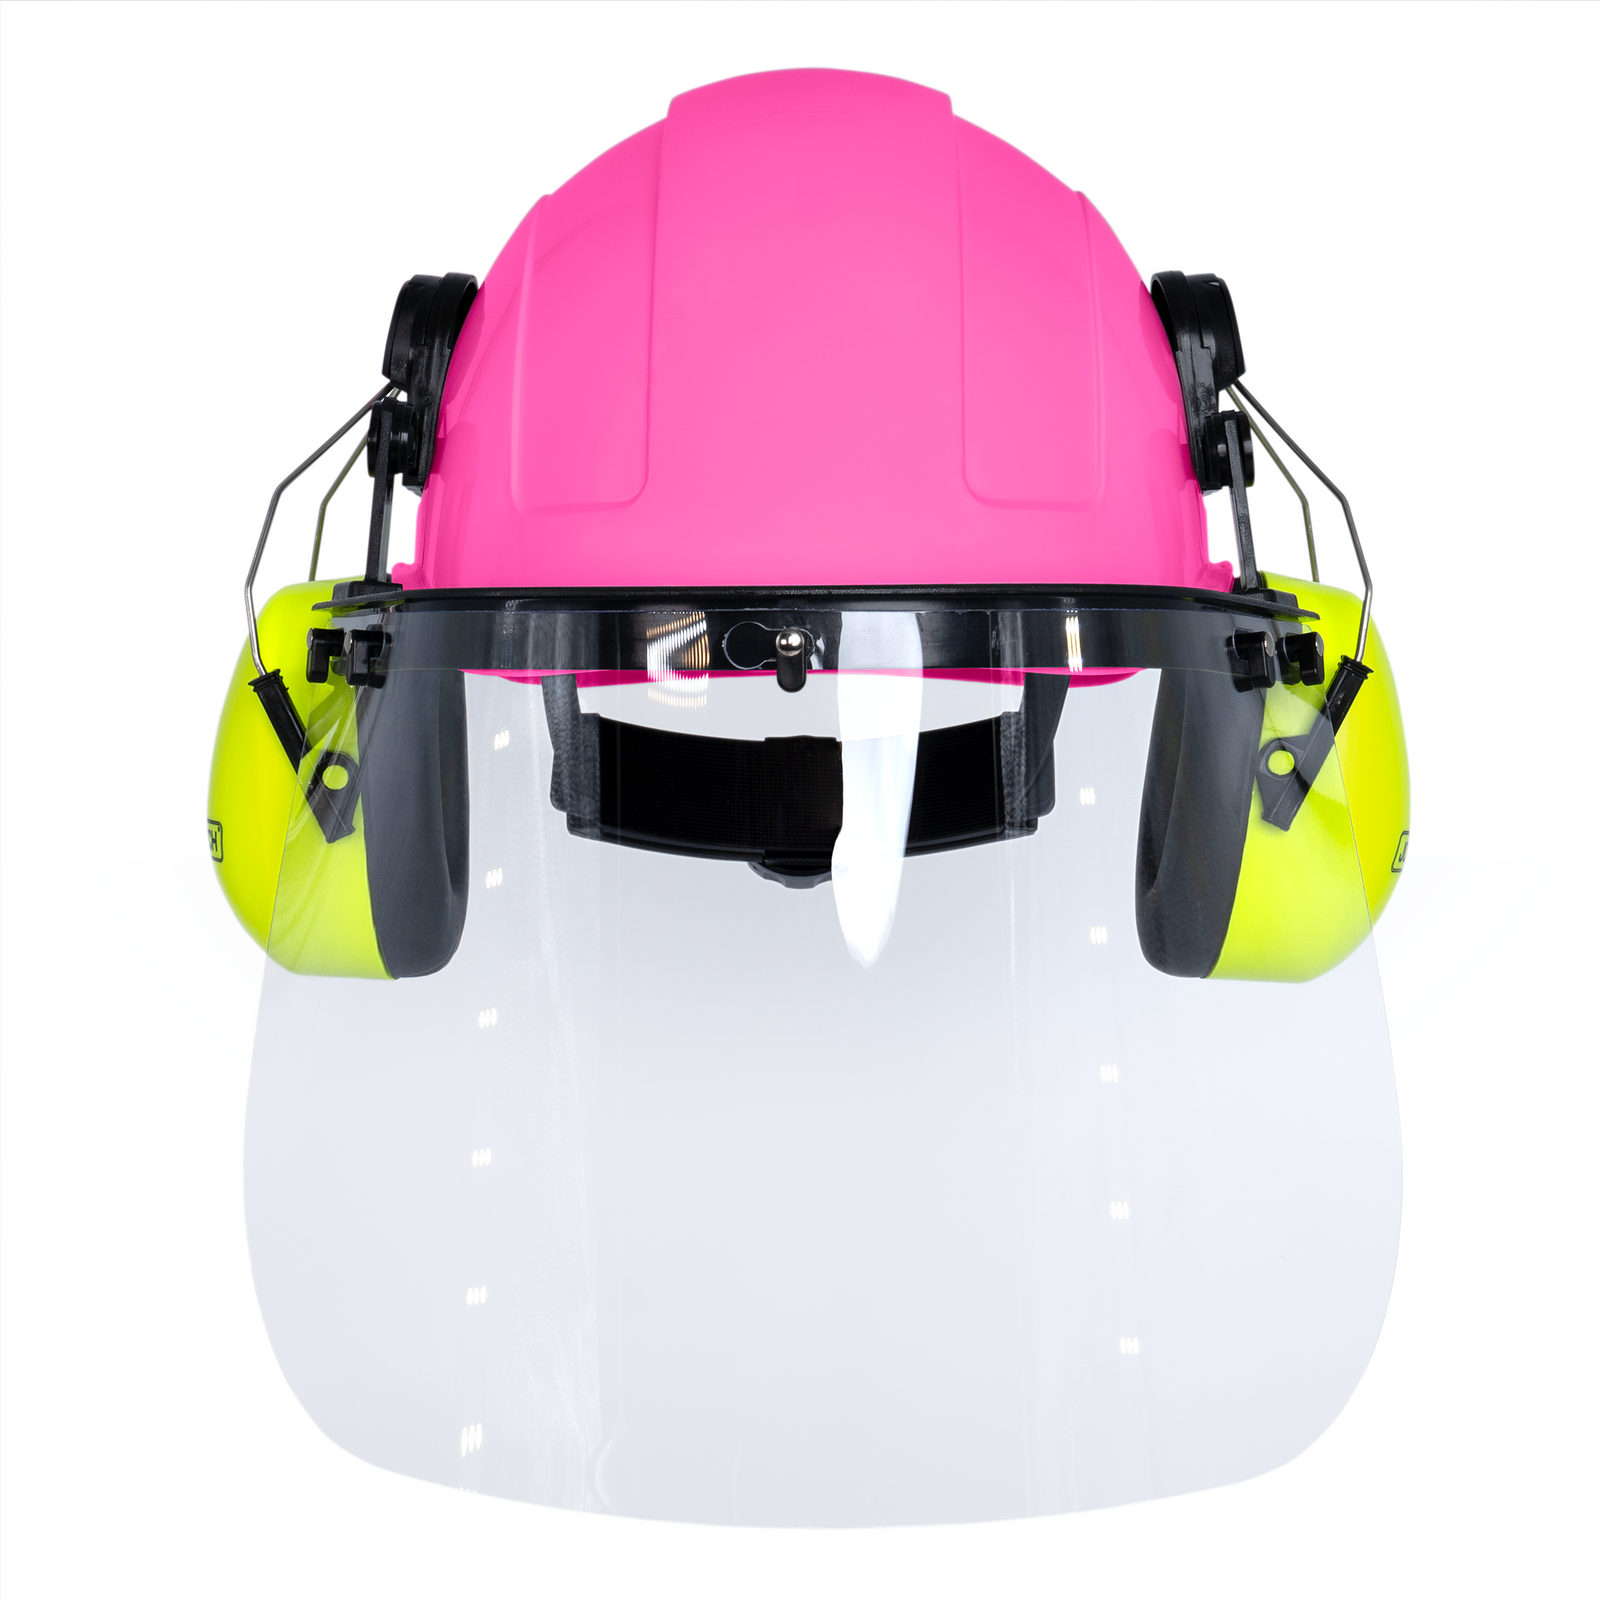 Cap-Style Hard Hat Kit with Lime Mountable Earmuffs and Hi-Transparency Face Shield